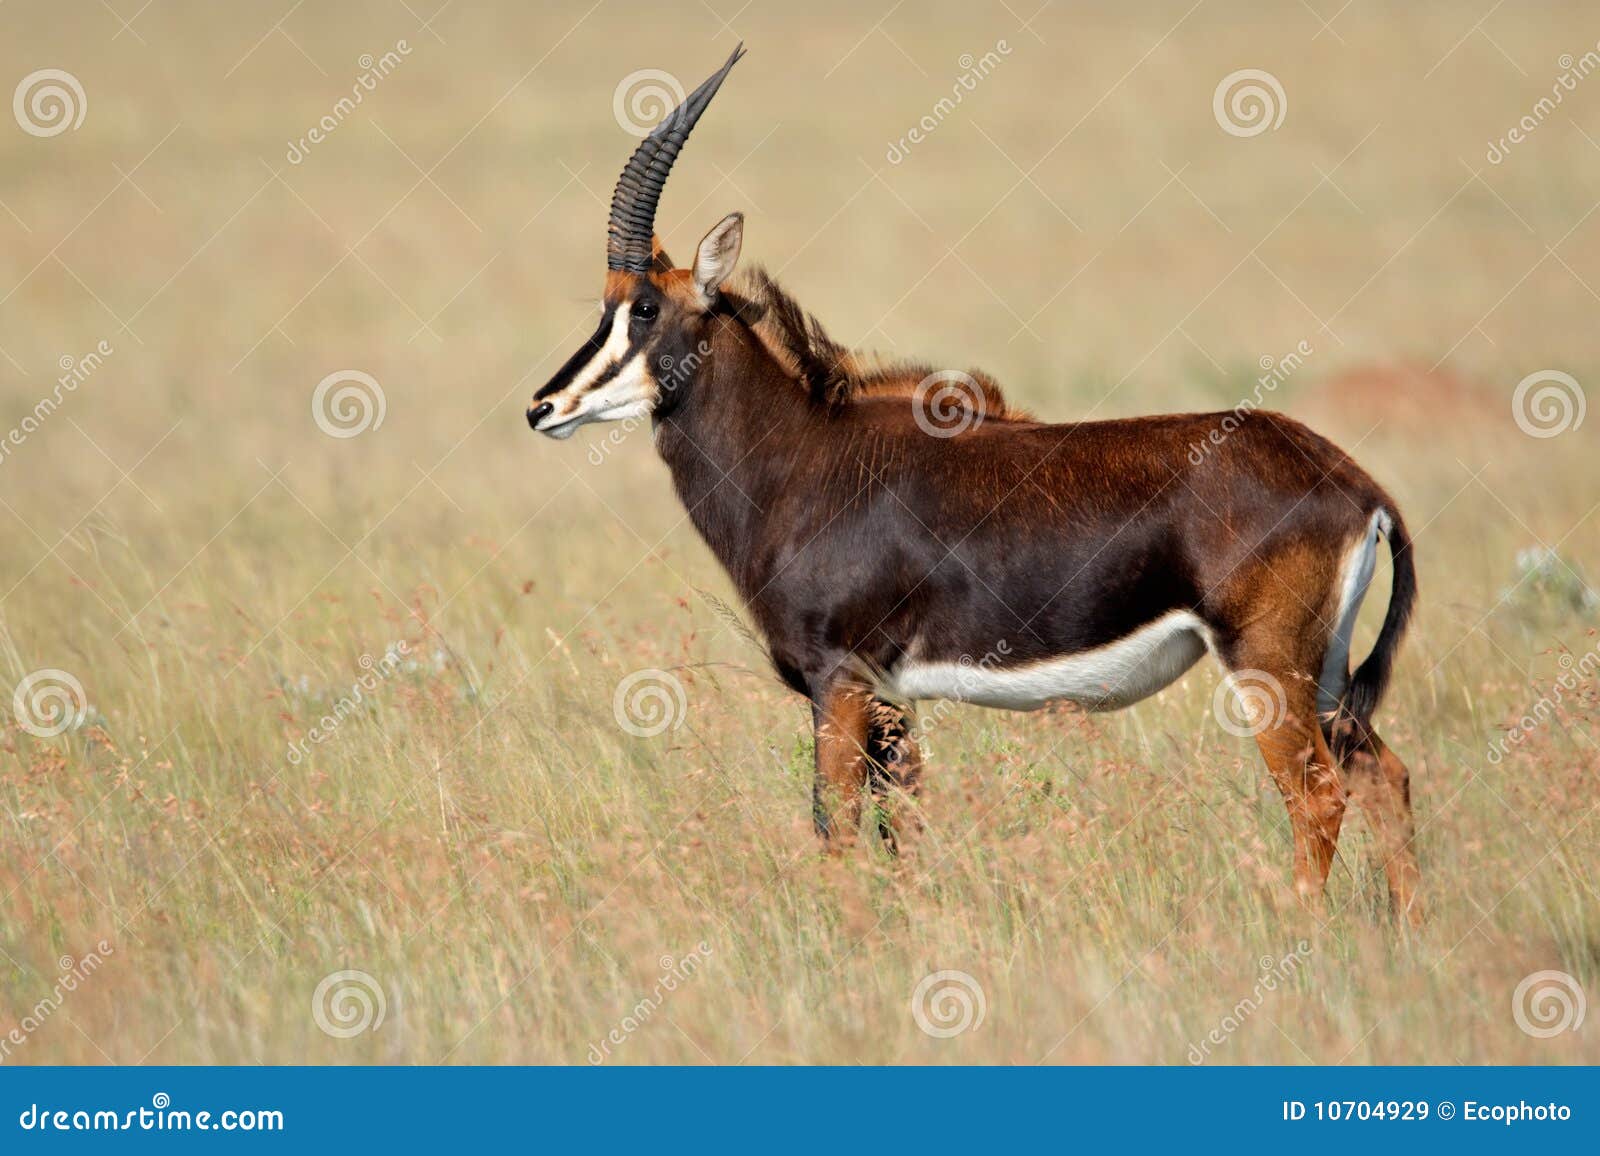 sable antelope, south africa